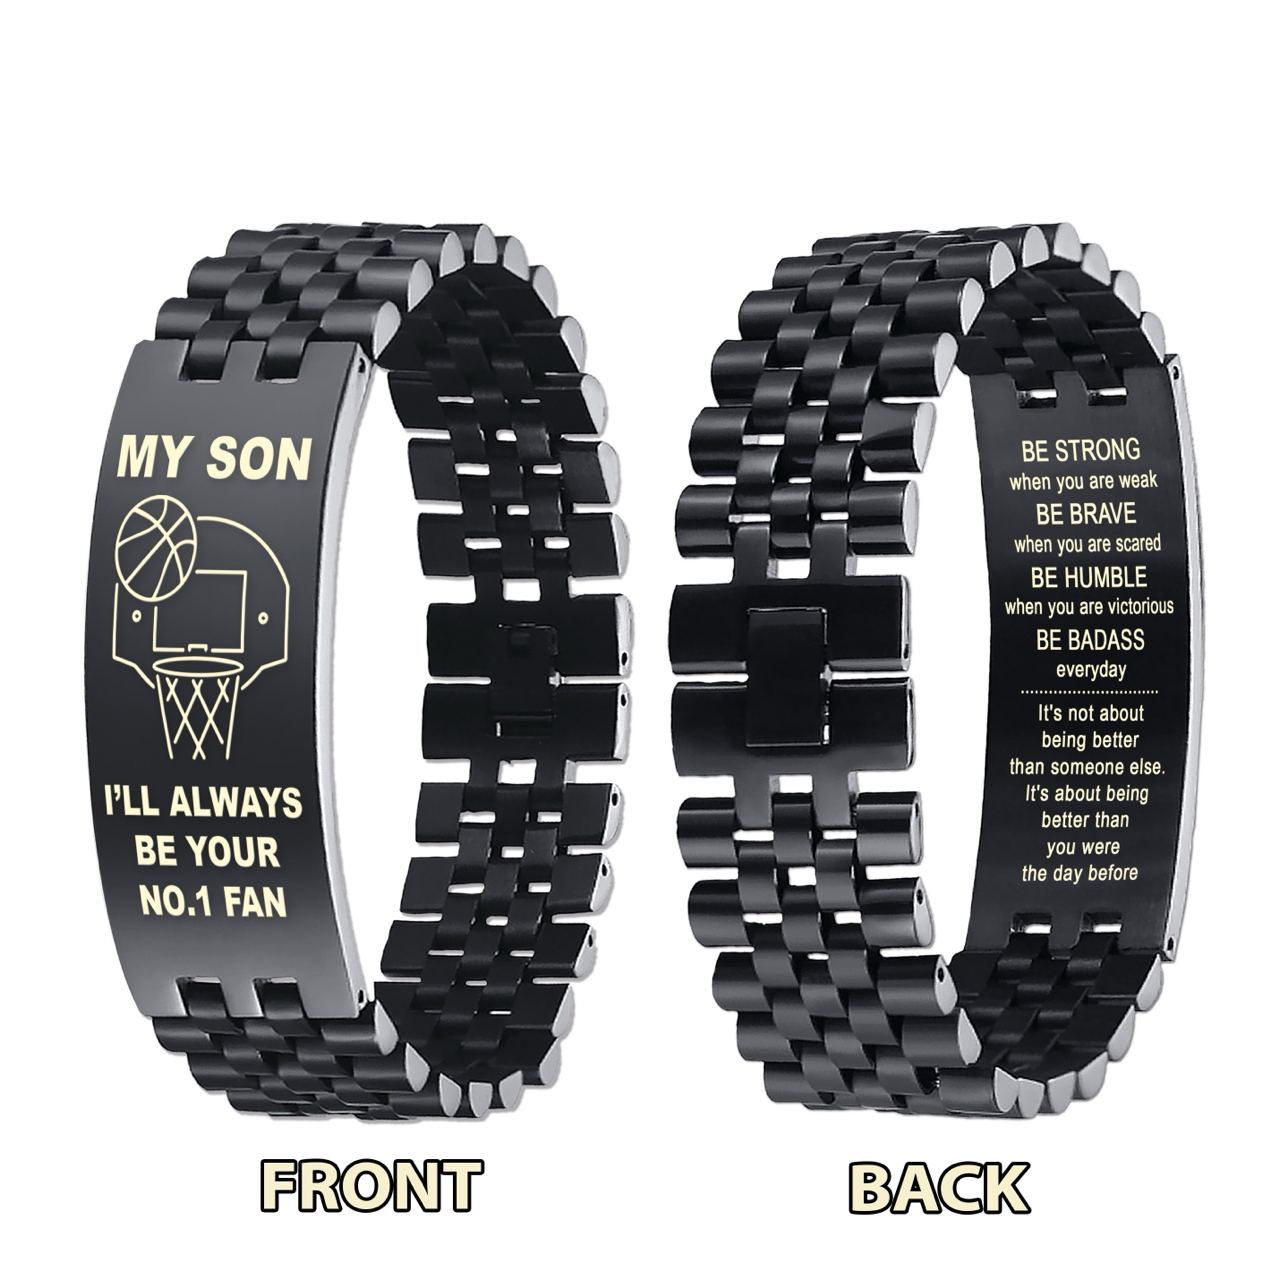 DS5 Customizable basketball bracelet, gifts from dad mom to son- I hope you believe in yourself